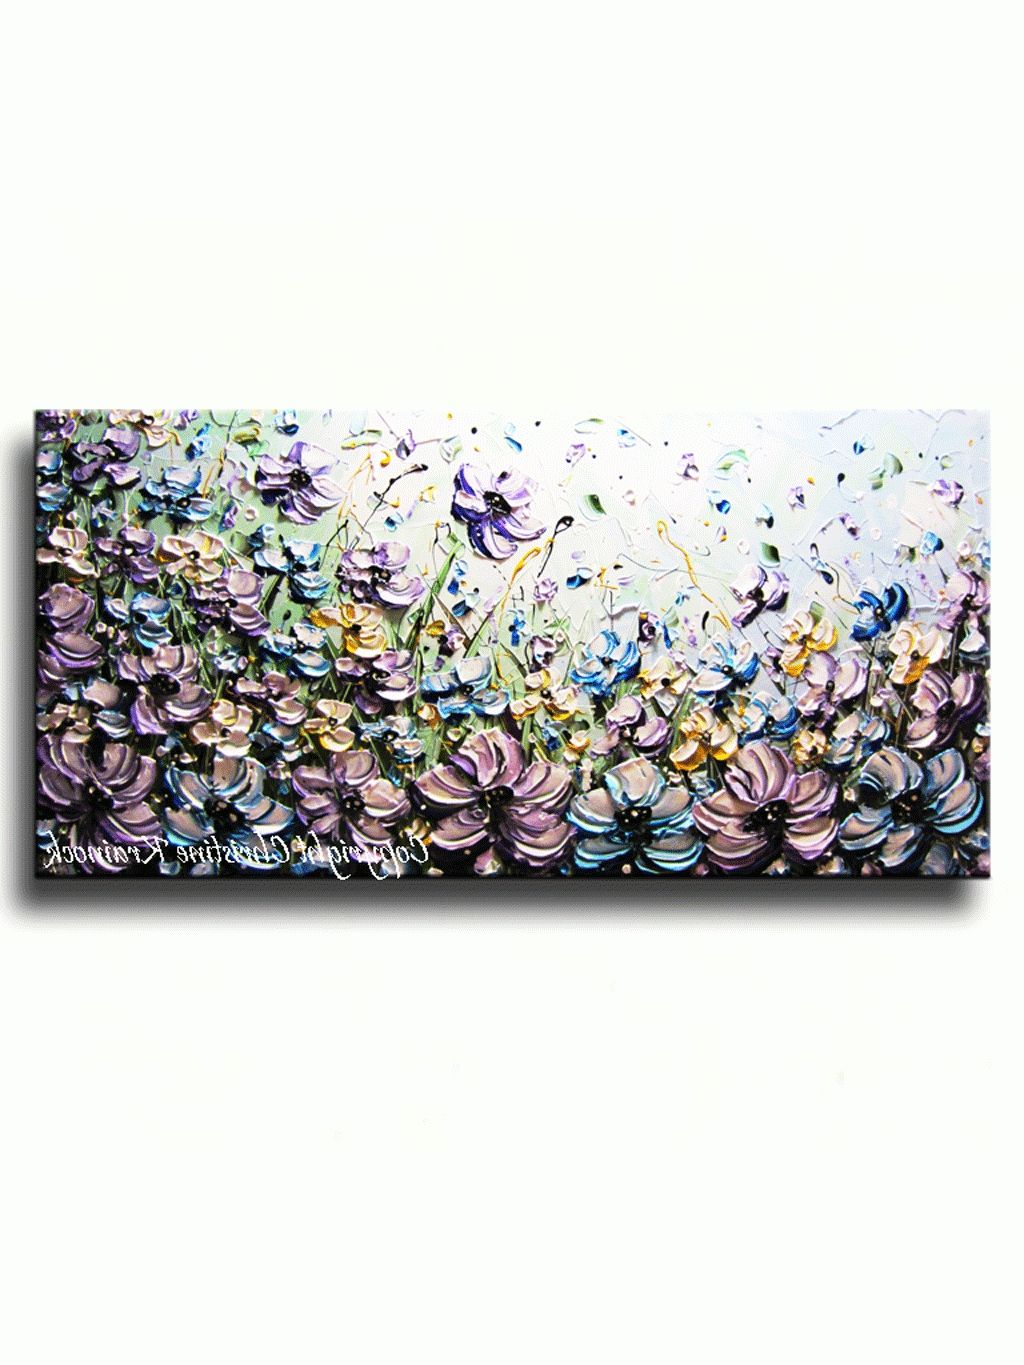 Original Art Abstract Painting Purple Blue Flowers Poppies With Most Popular Purple Abstract Wall Art (View 12 of 15)